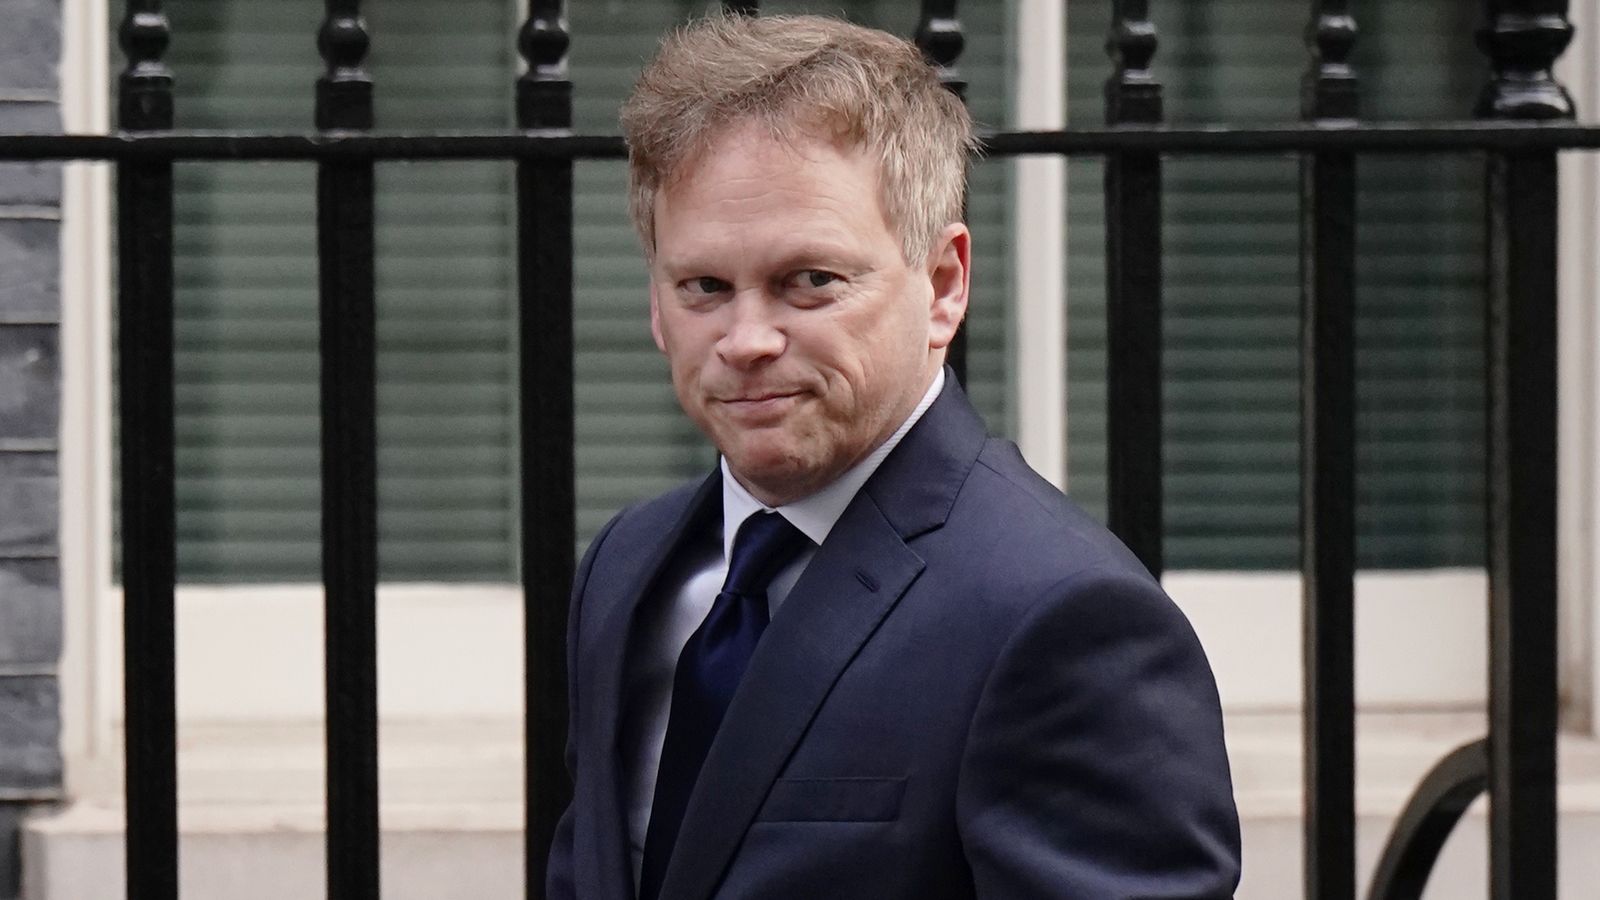 Energy bosses meet with Grant Shapps amid debate over future of net zero